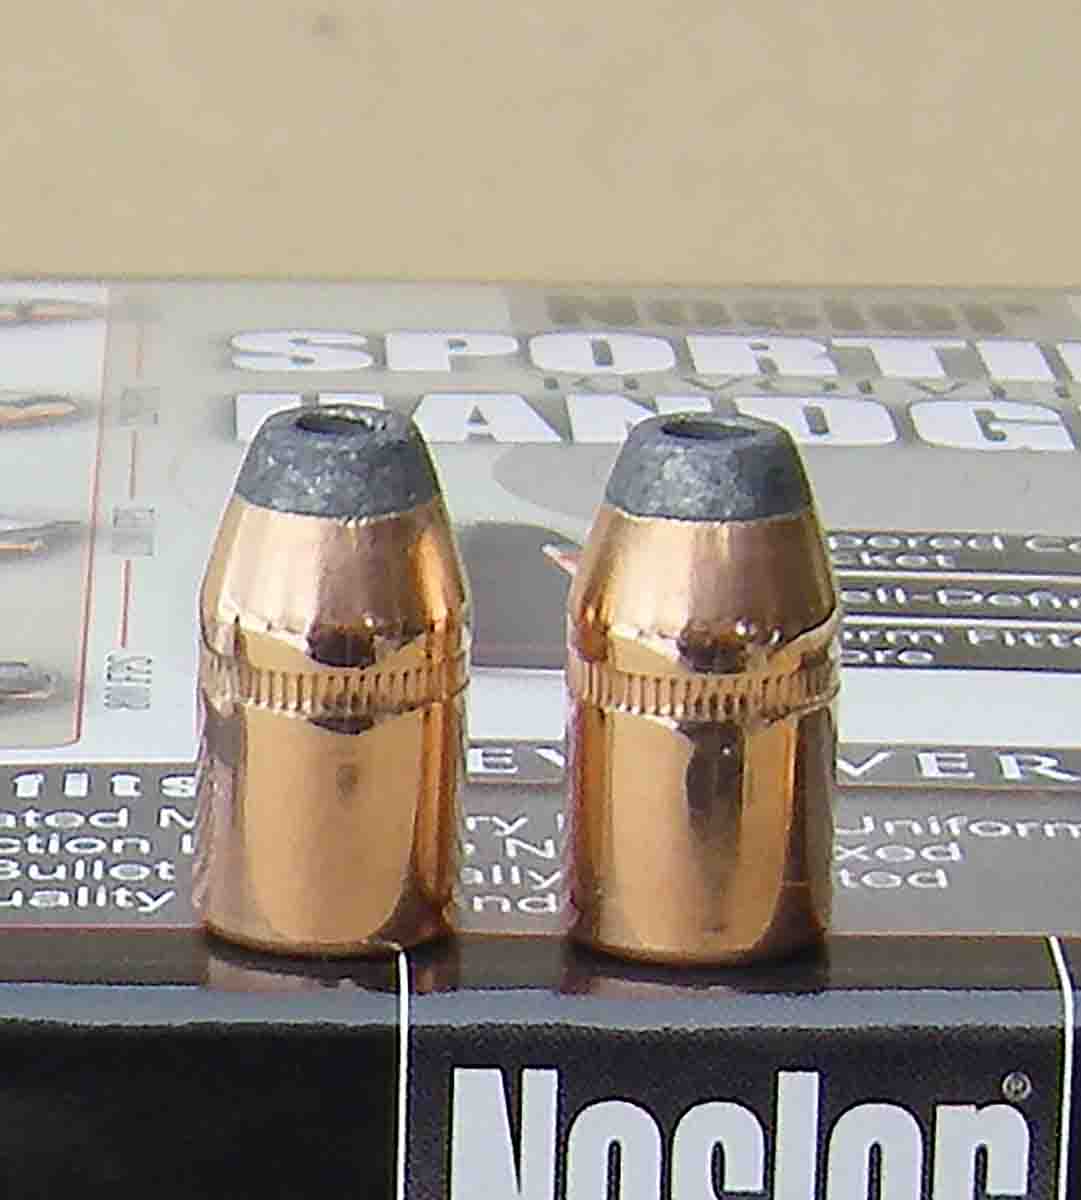 Nosler Sporting Handgun revolver bullets feature a comparatively shallow crimp cannelure that often gives excellent results when taper crimped.